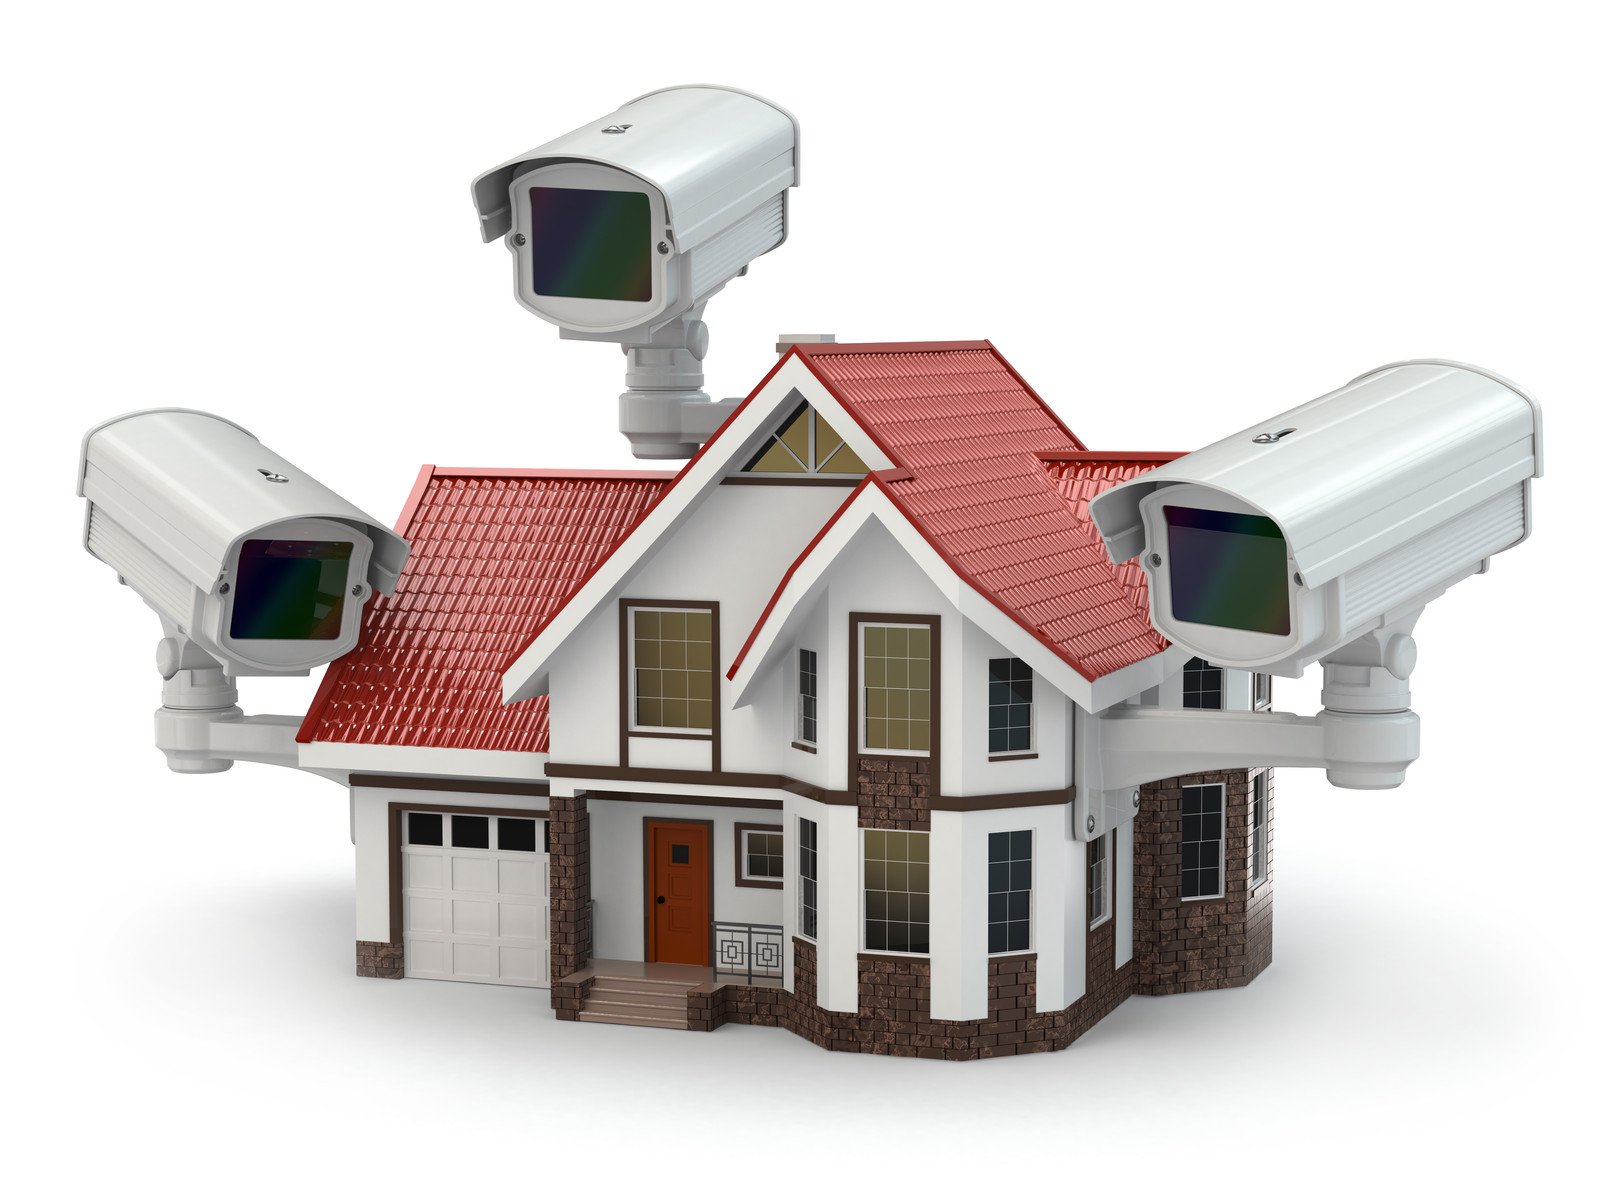 Security Cameras - Your Top 5 Myths